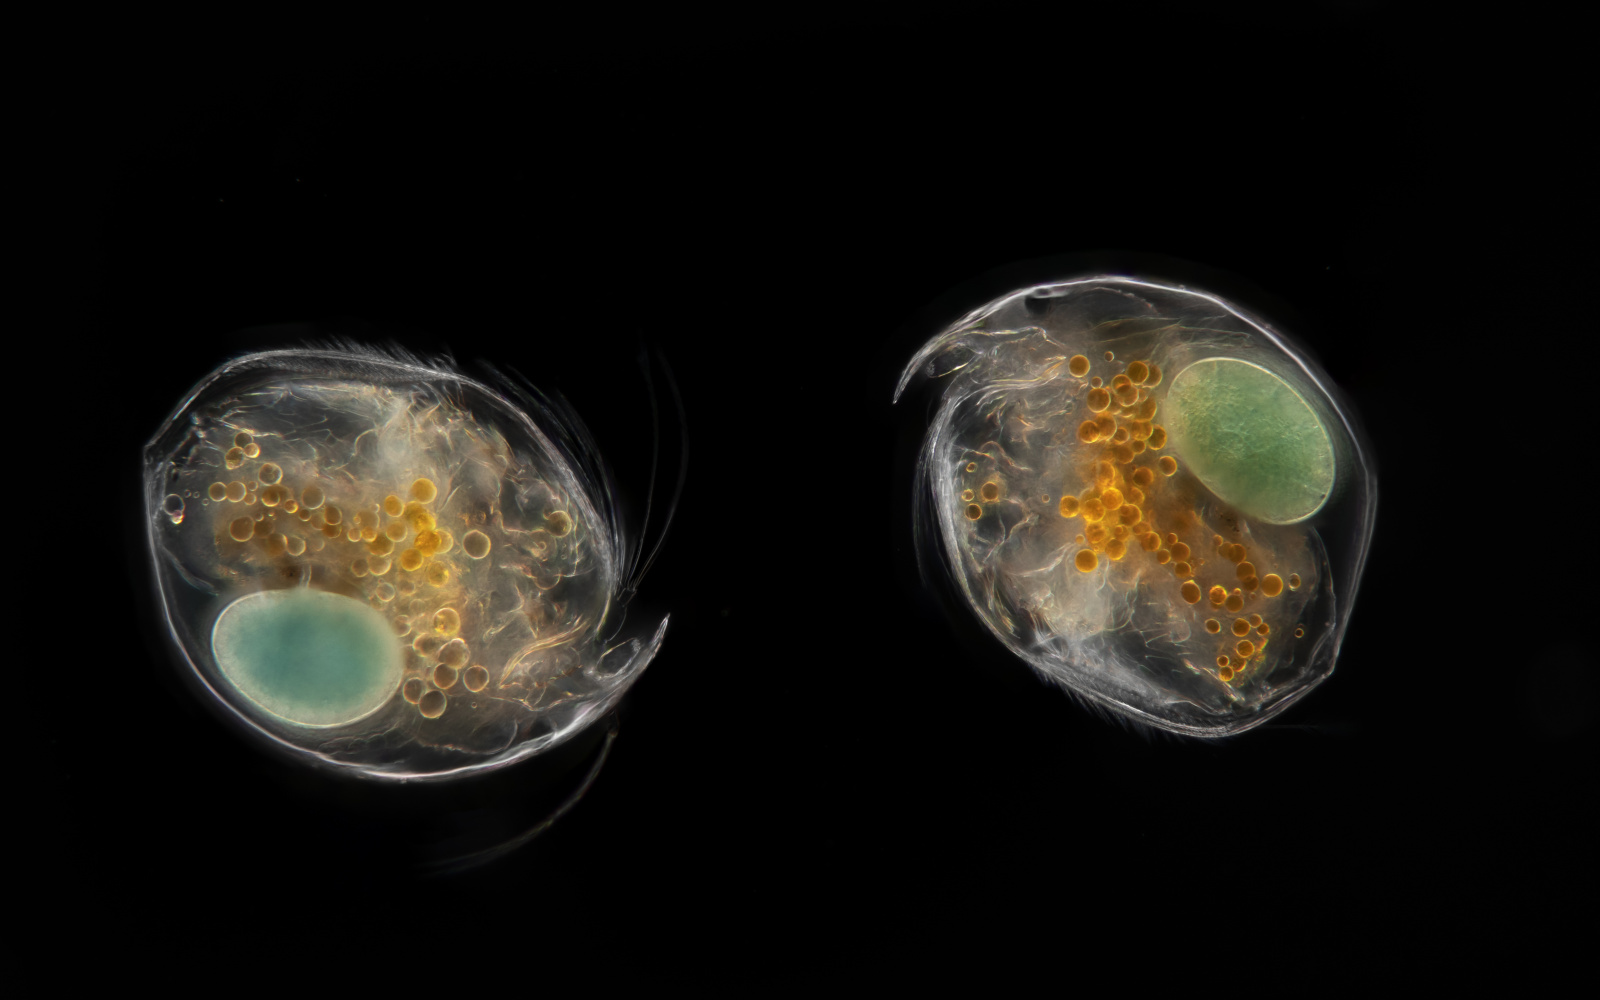 You can see two digitized plantcells against a black background.